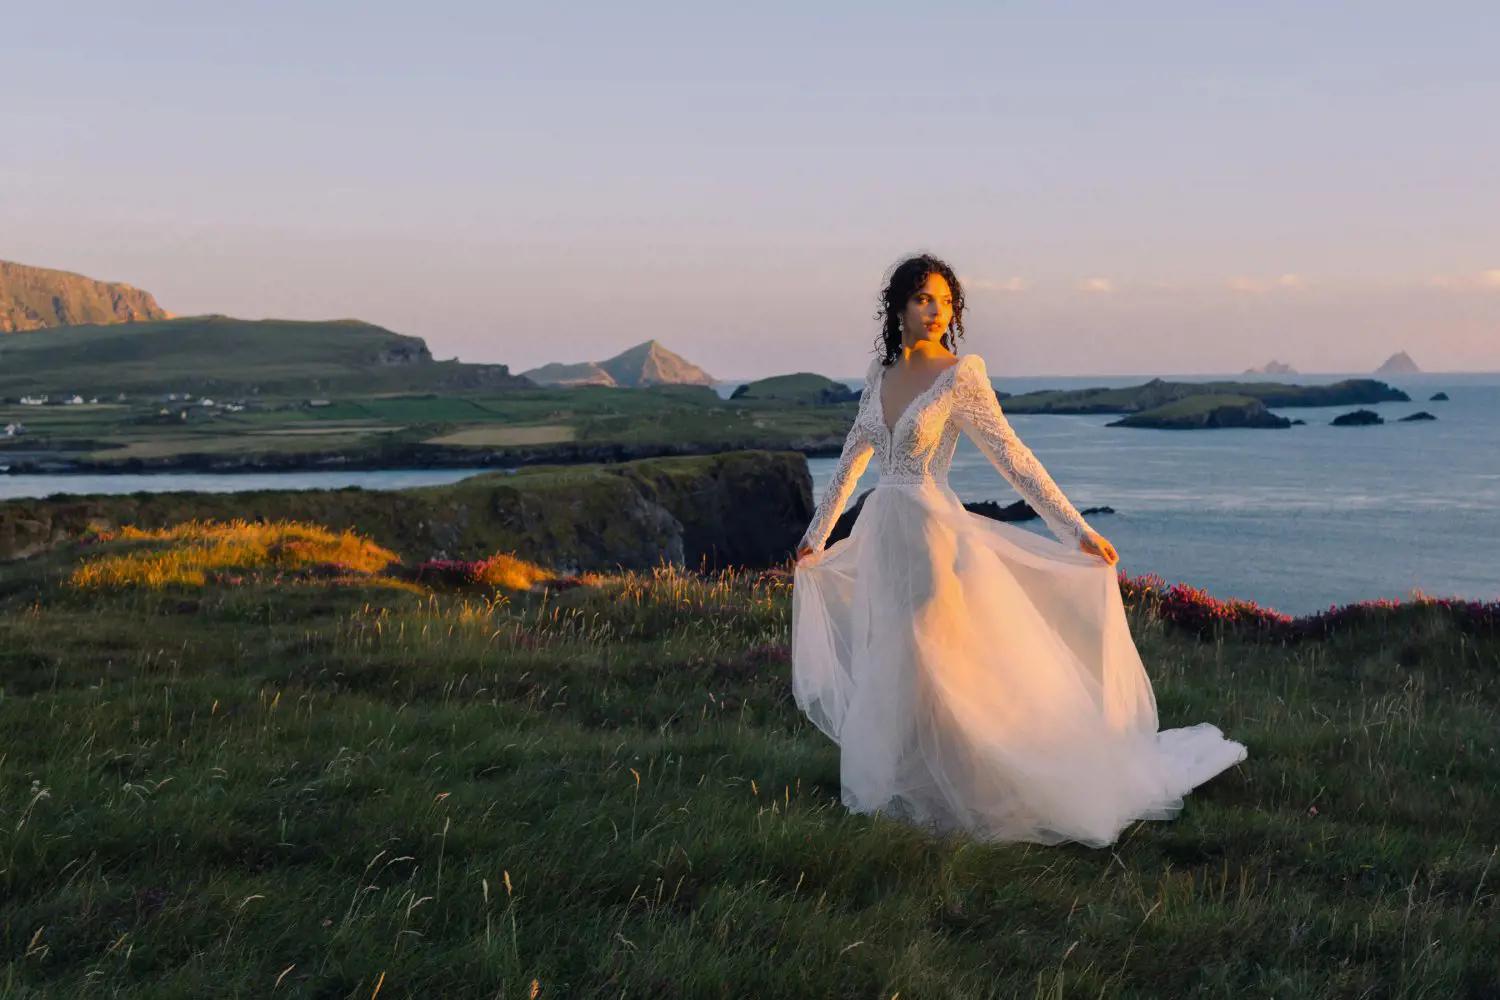 Model wearing a bridal gown on the grass